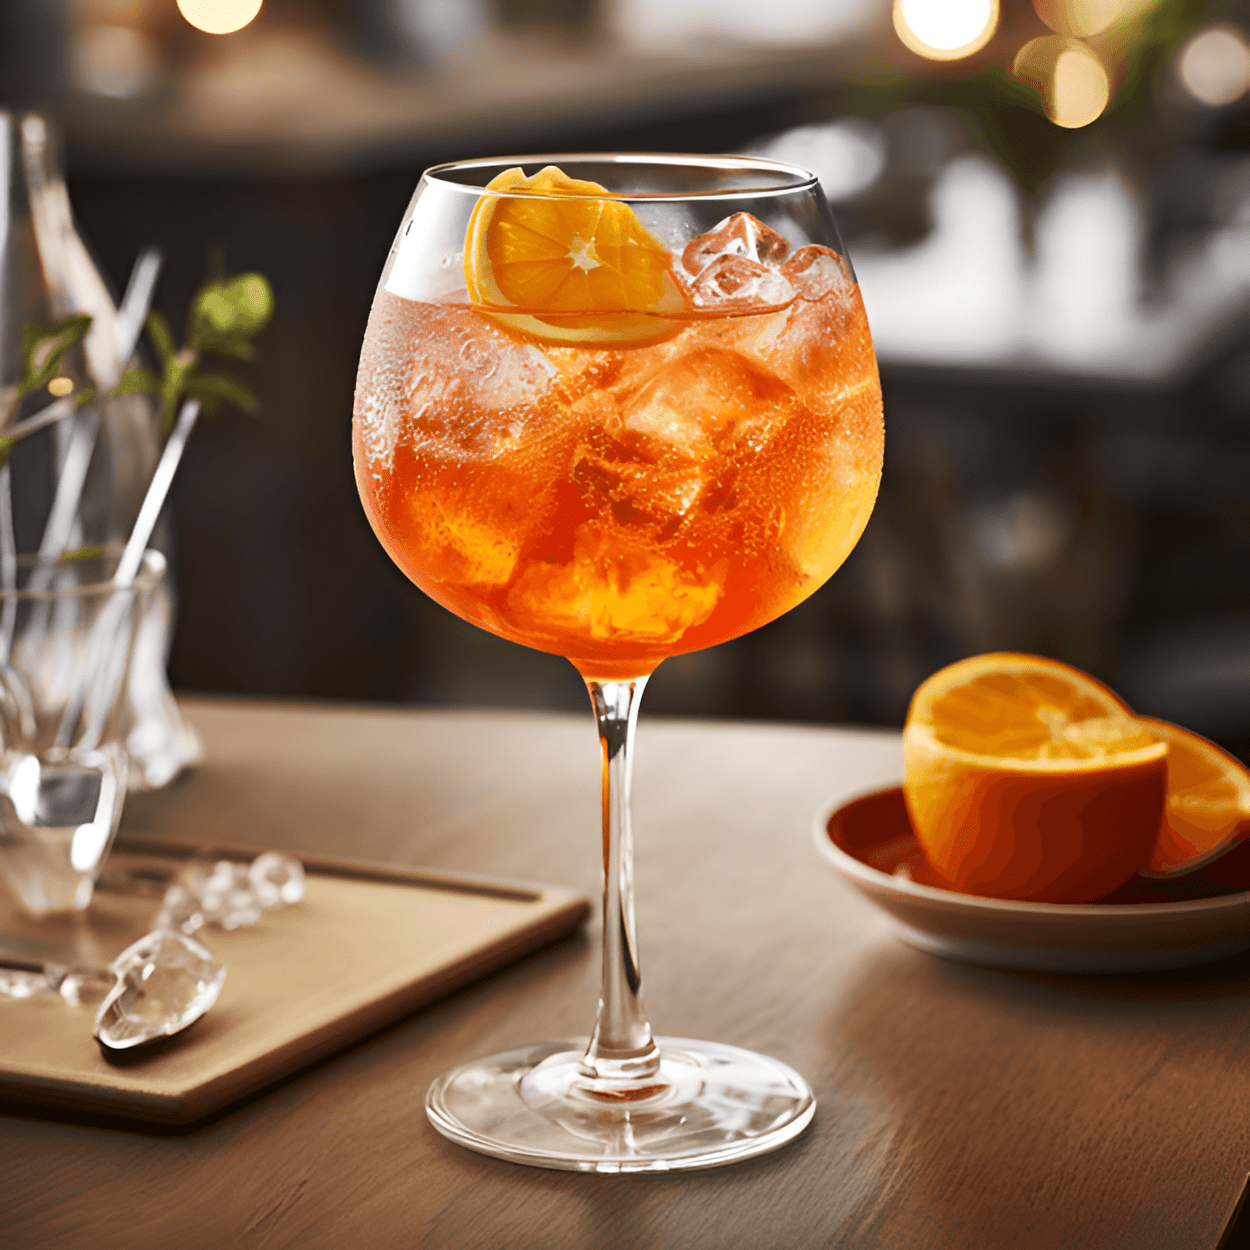 San Pellegrino Spritz Cocktail Recipe - The San Pellegrino Spritz is a light, refreshing cocktail with a bubbly texture. It has a sweet and sour taste, with a hint of citrus and a slightly bitter aftertaste.